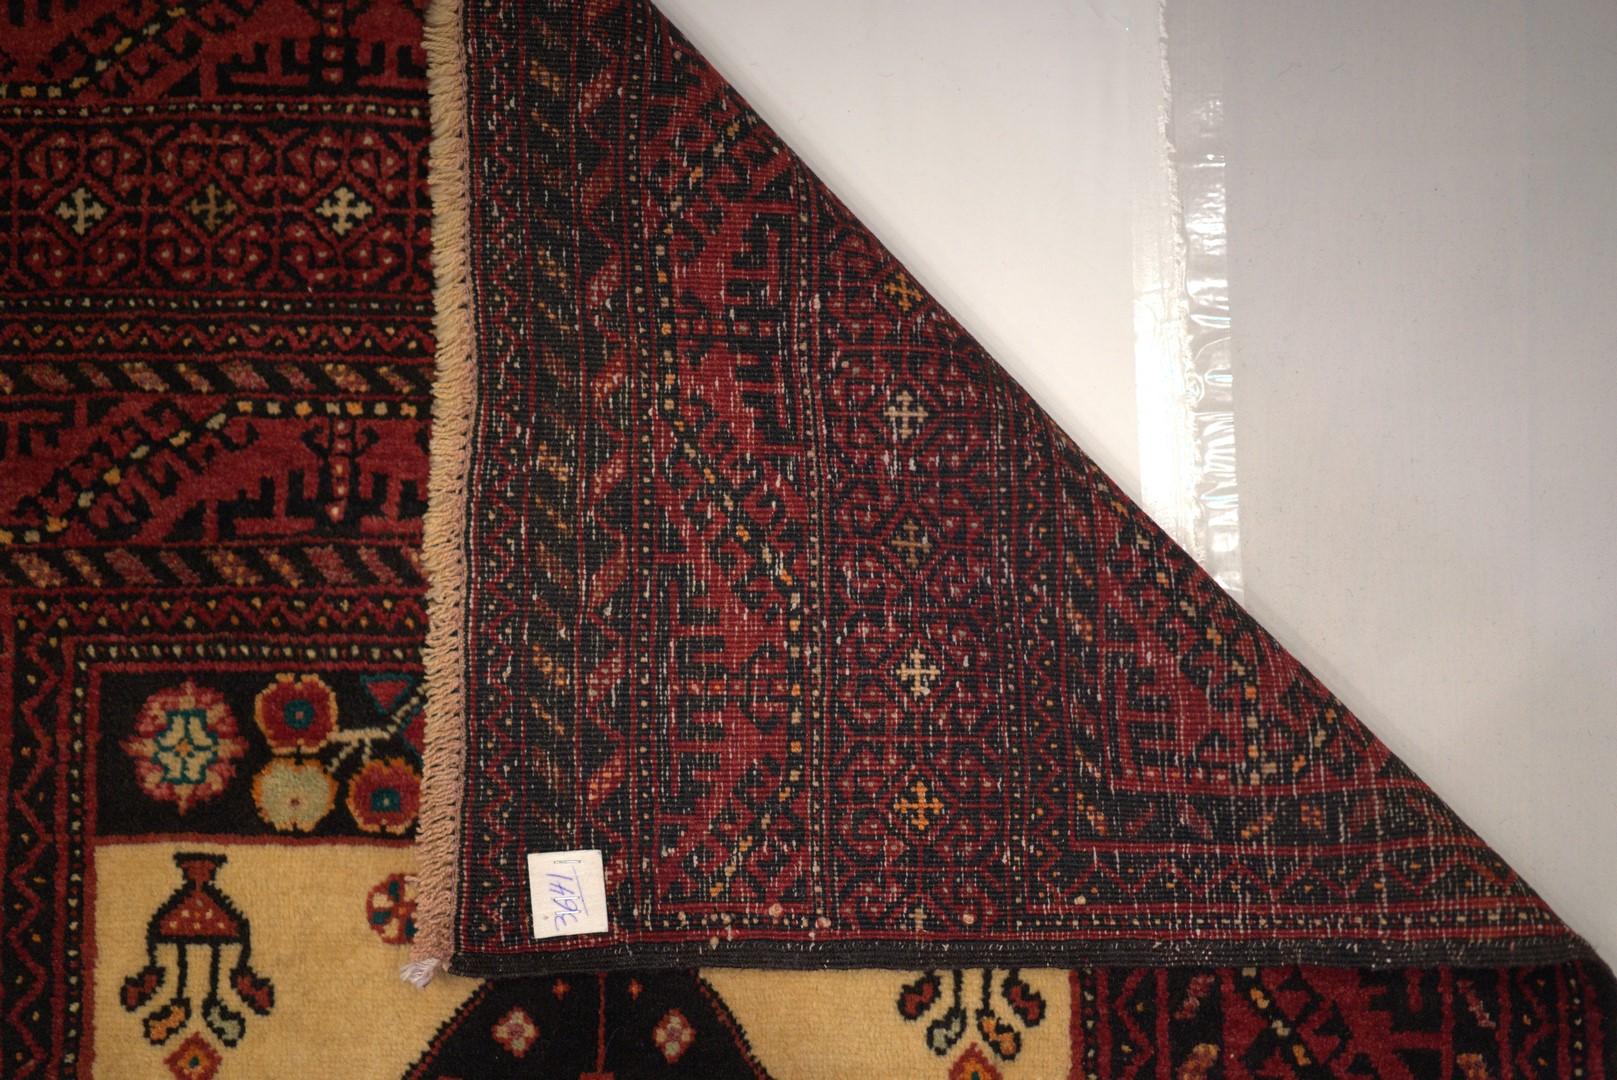 This unusual piece was actually handwoven around 1960, a period of exchange and borrowing amongst some tribal groups, by the Beluchis, who utilized or “ borrowed “ some classic Qashgai iconography in the main field, and took the border design from